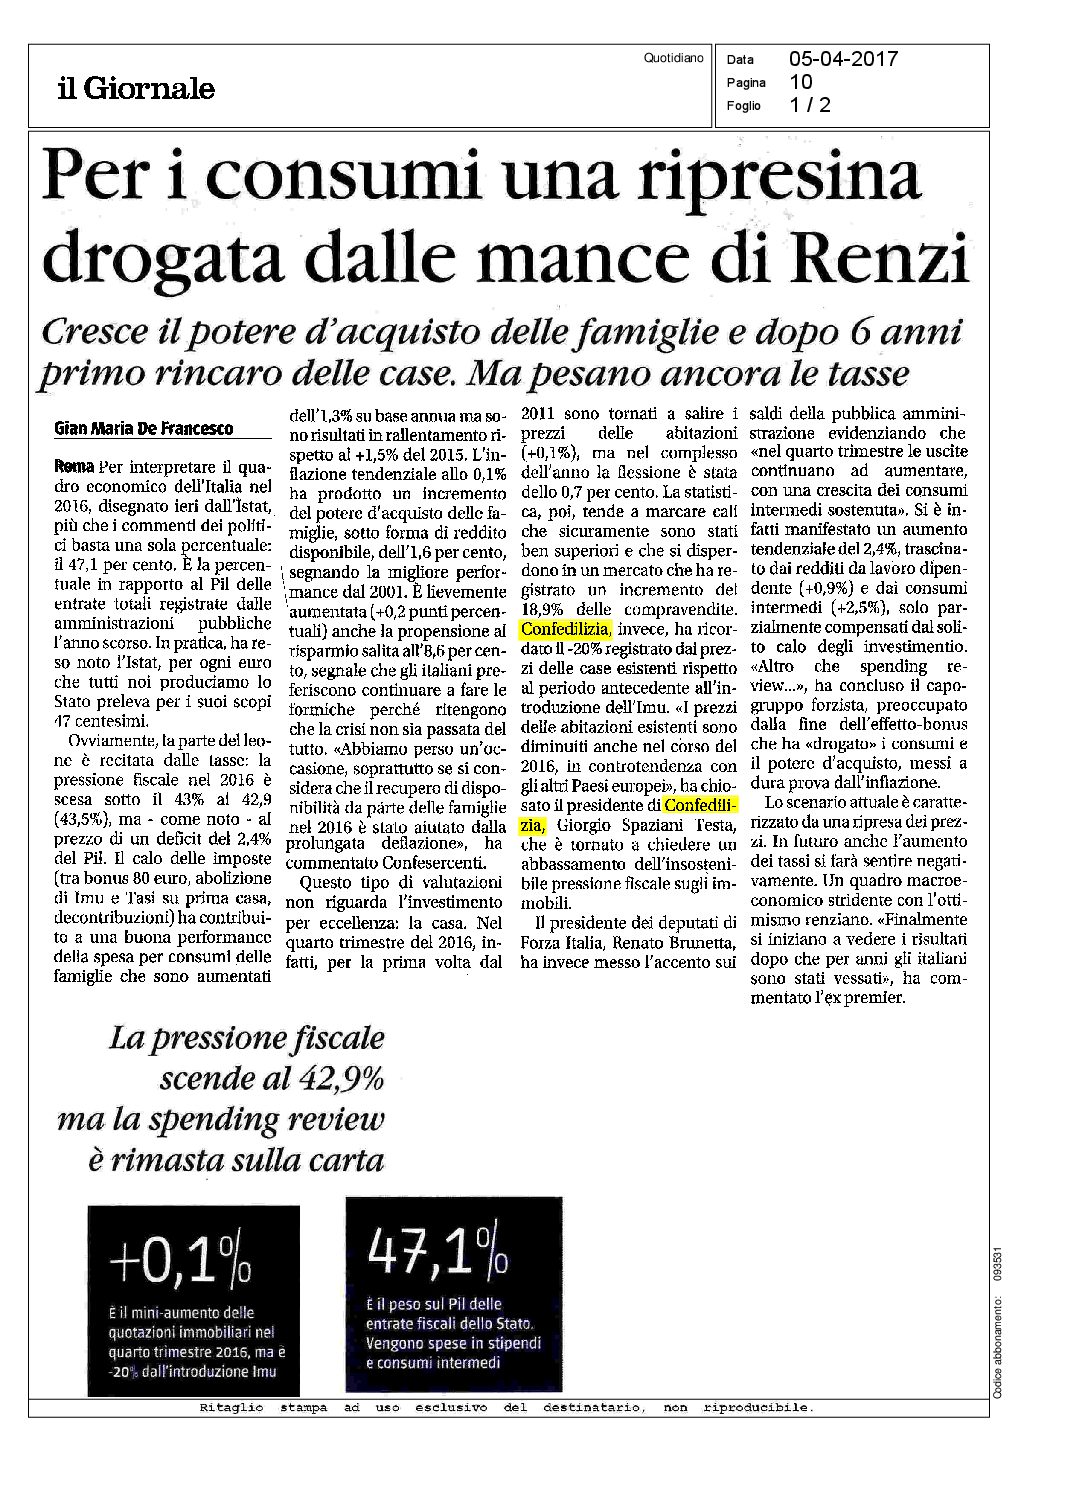 Giornale_5.4.17_2